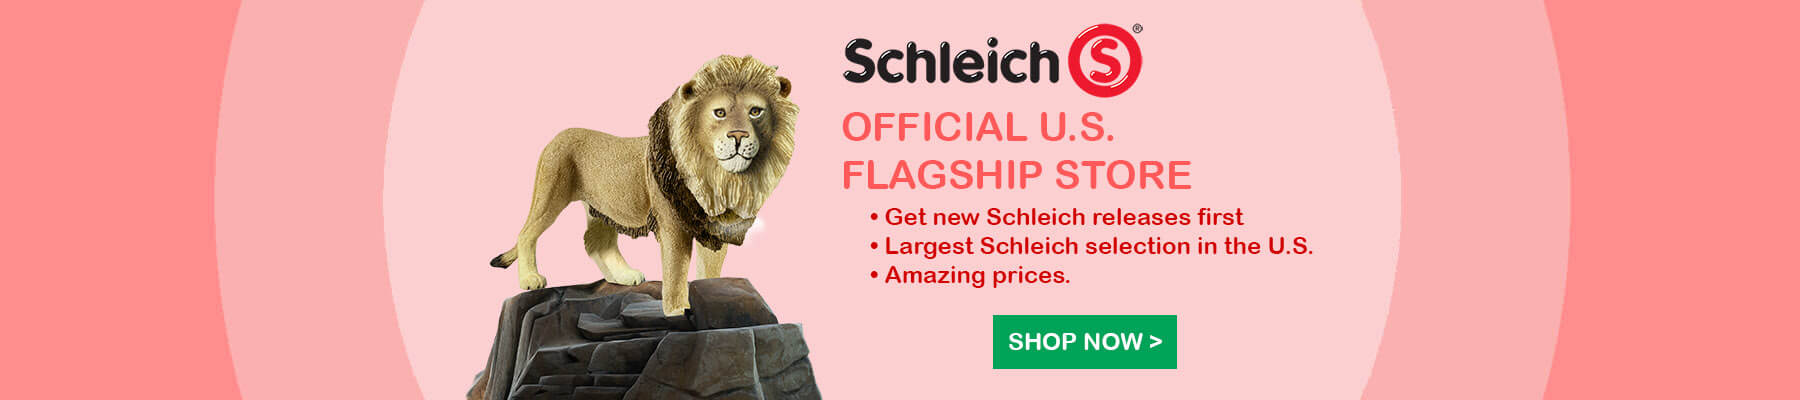 Maziply Toys is official Schleich Flagship Store in the United States.